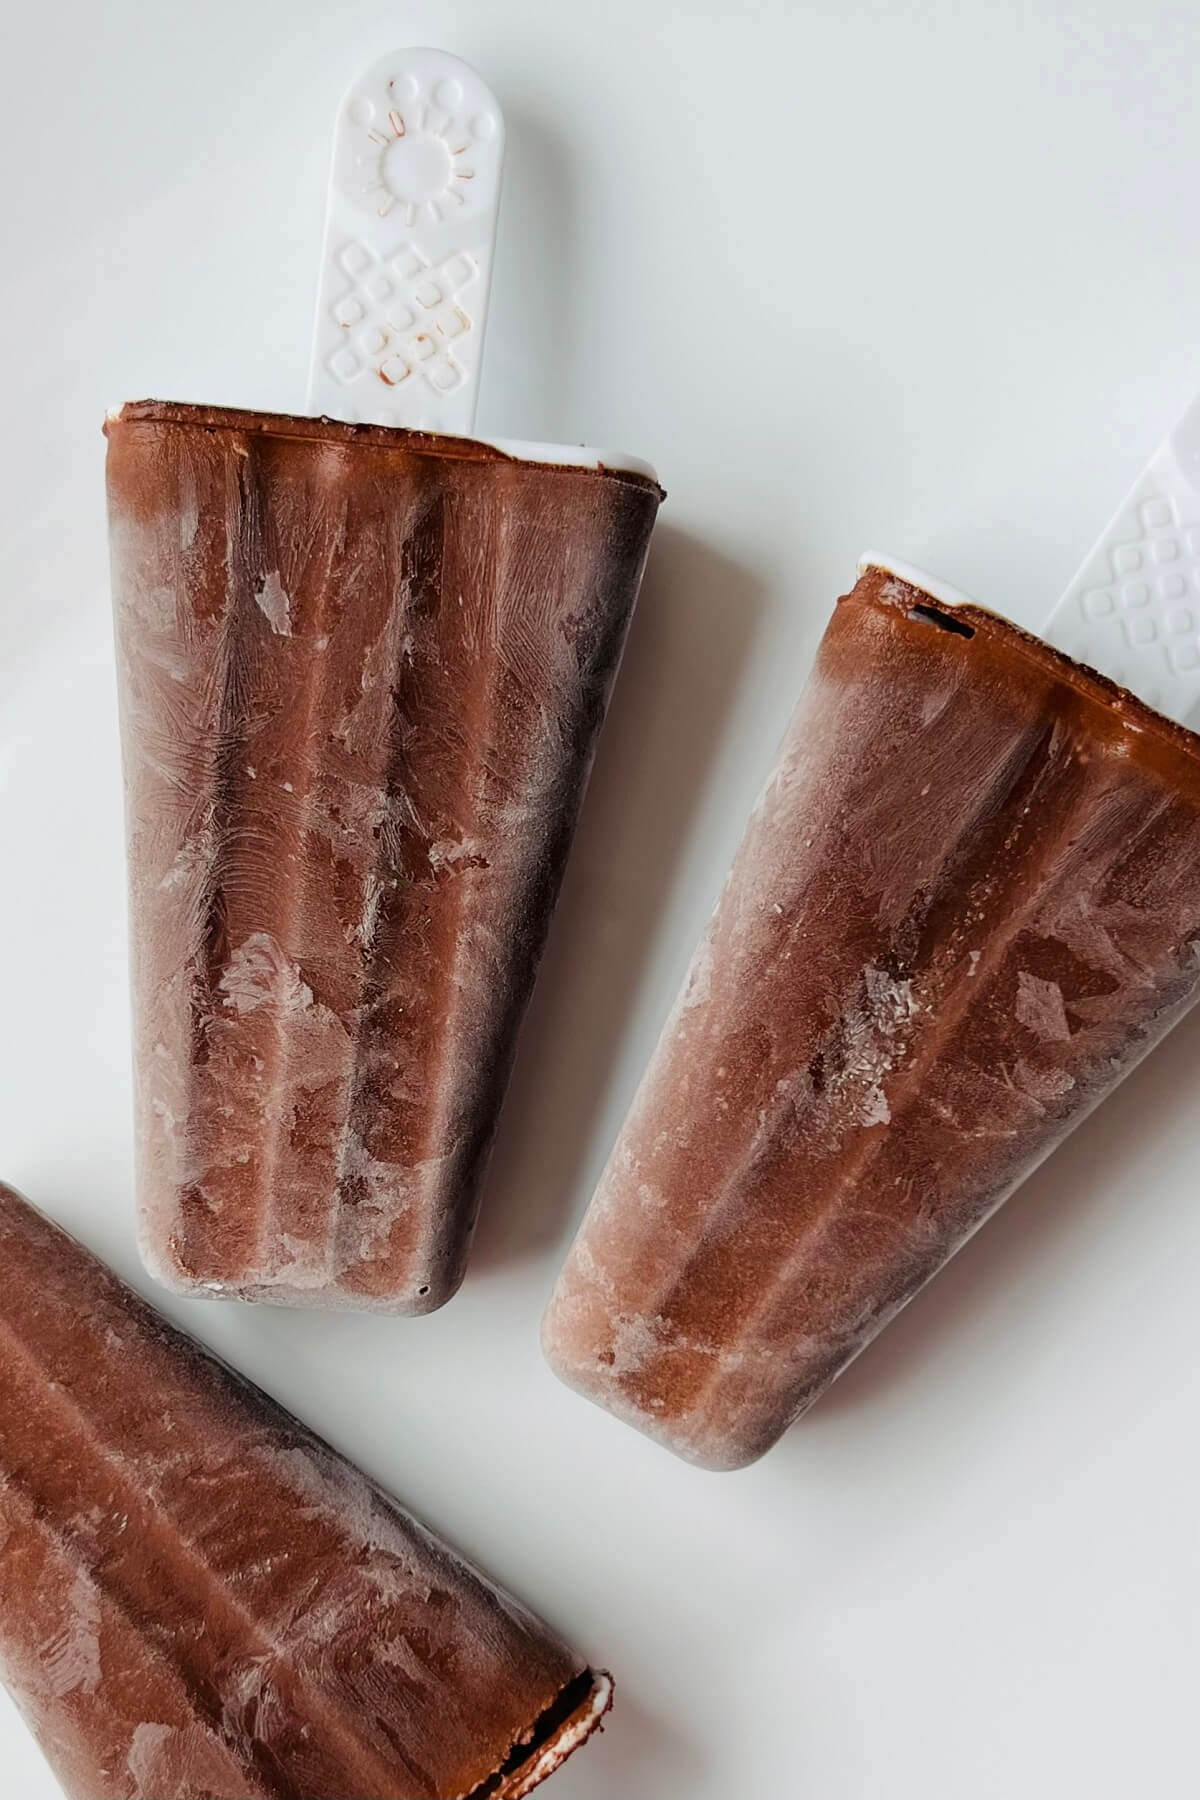 Homemade popsicles on a white plate.